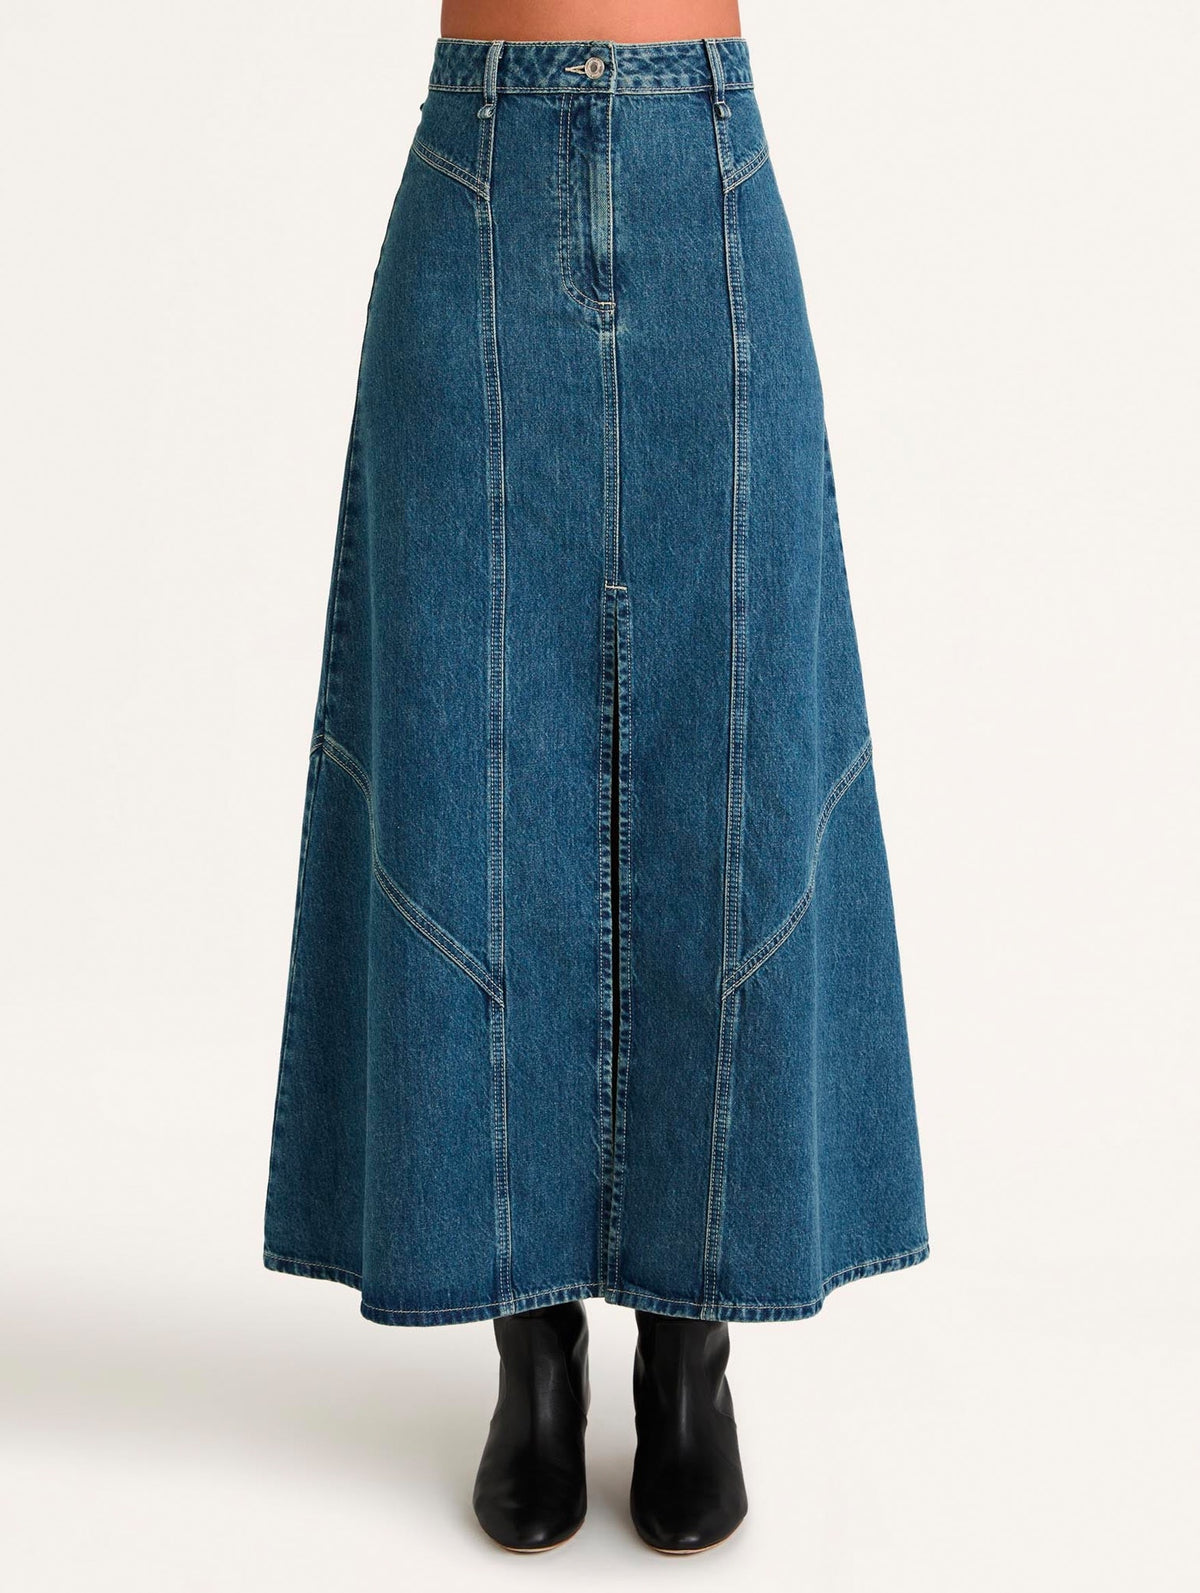 Melody Skirt in Mid-Blue Wash